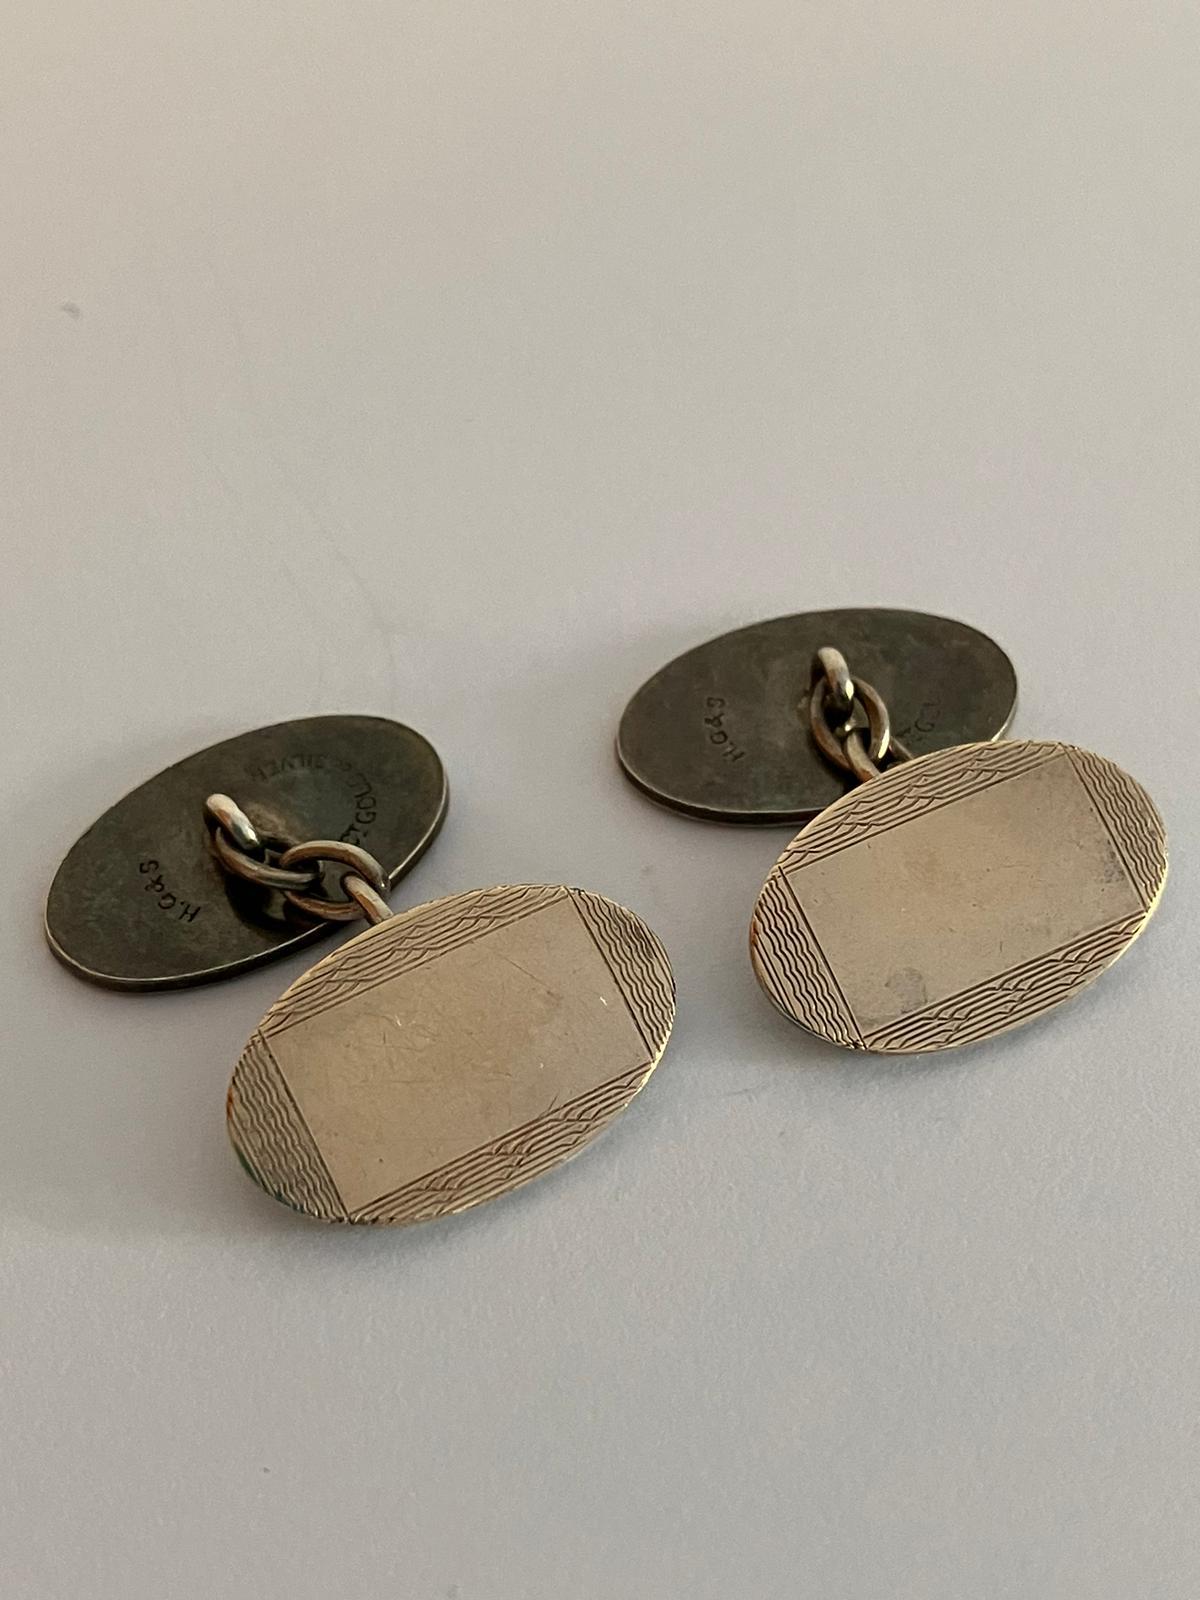 Vintage 9 carat GOLD and SILVER CUFFLINKS.Chain Linked.